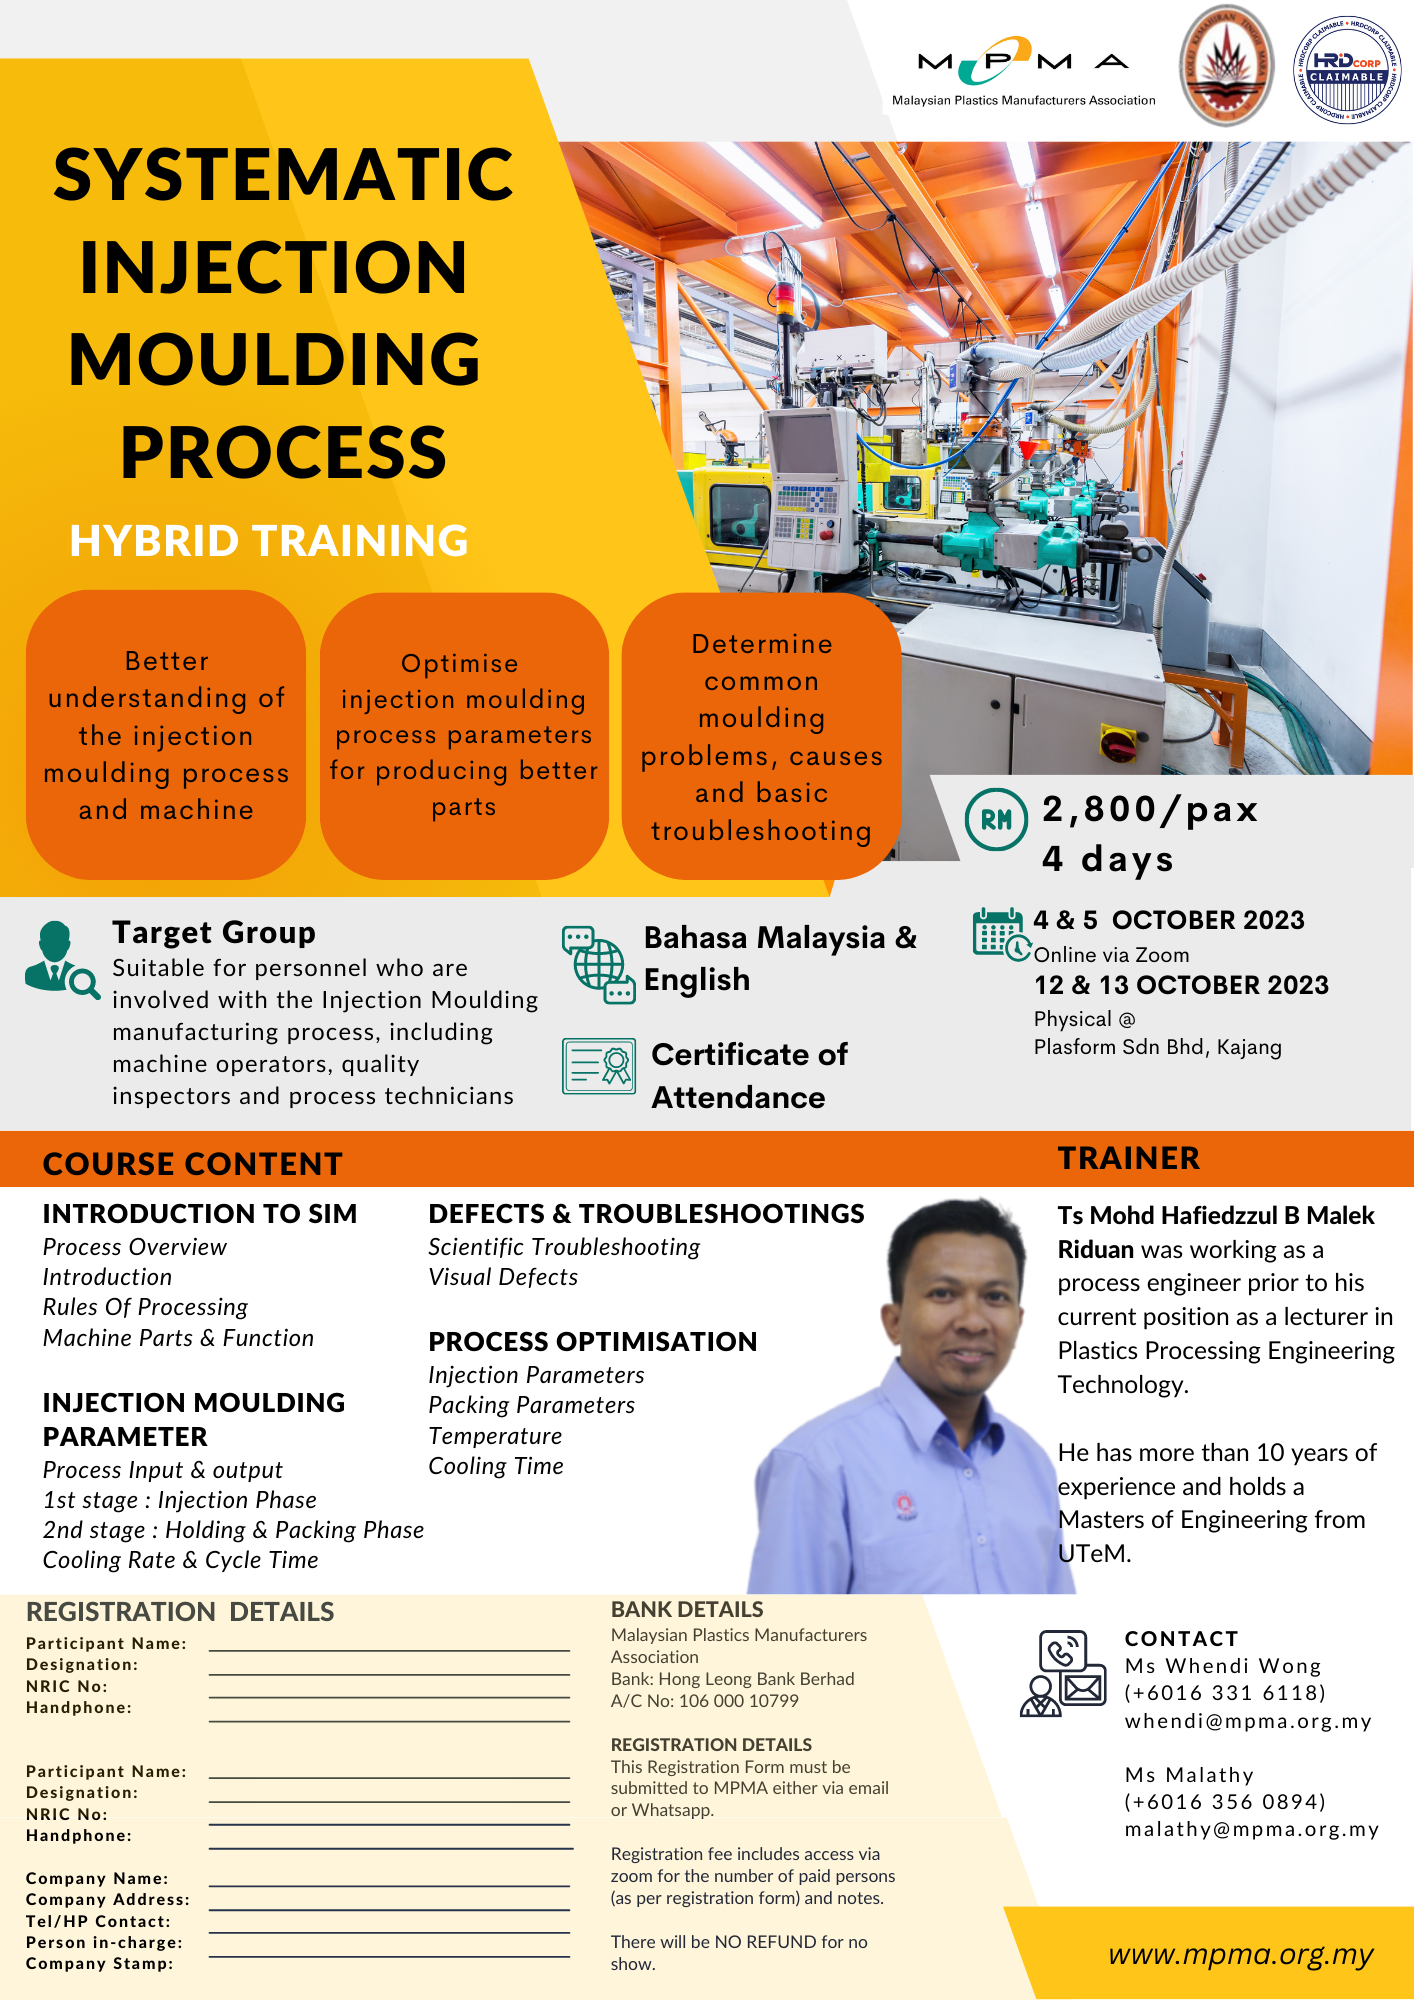 Systematic Injection Moulding Process October 2023 (Hybrid training)